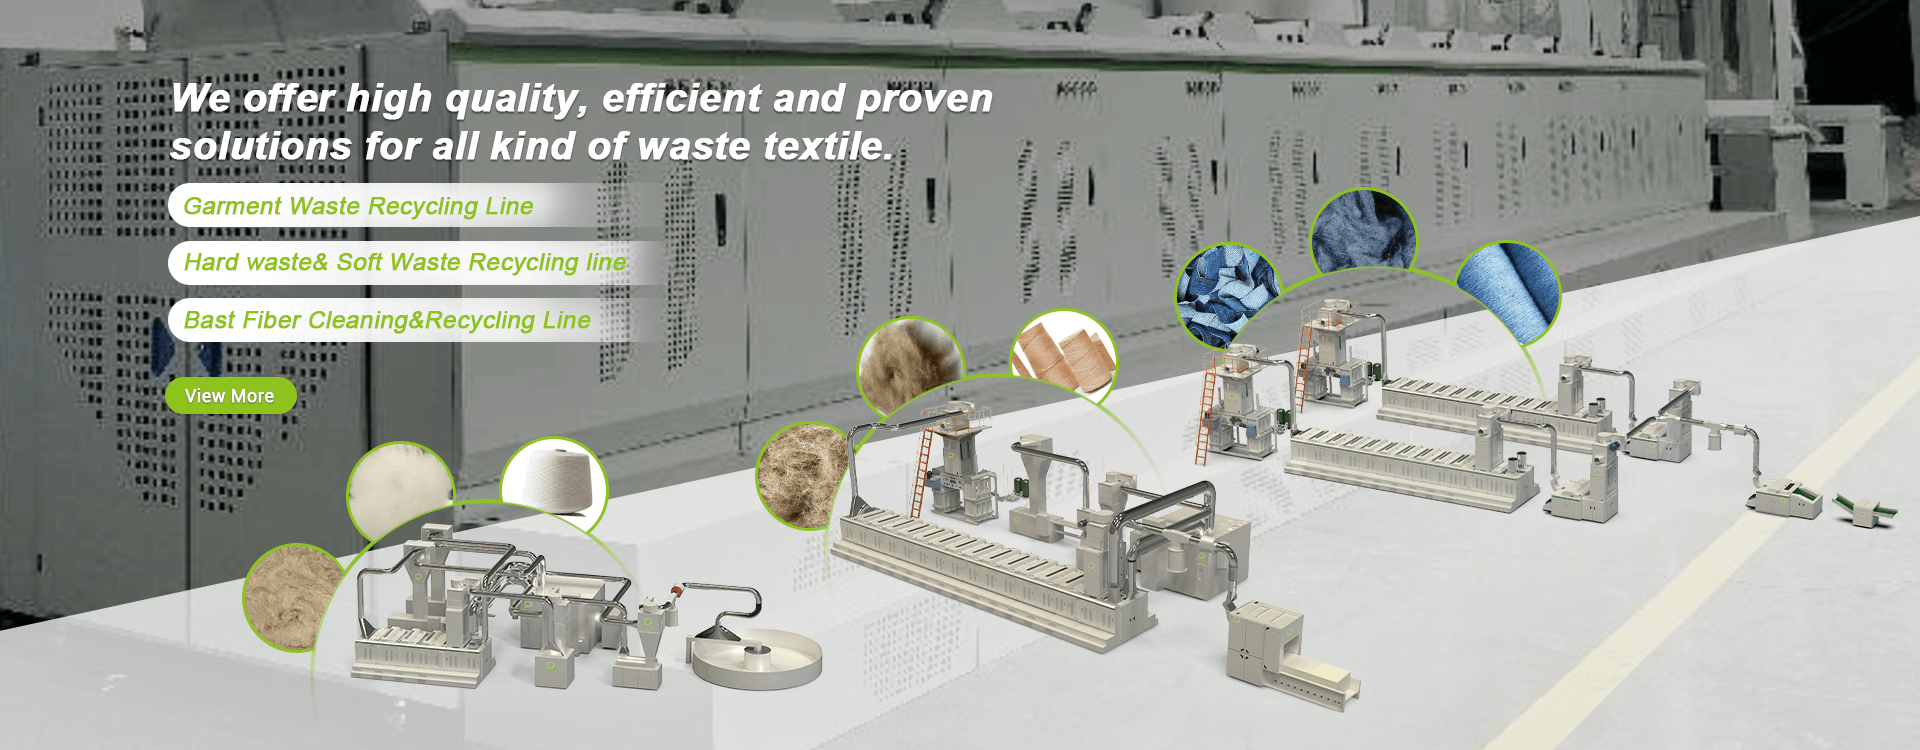 We Offer Solutions for waste textile